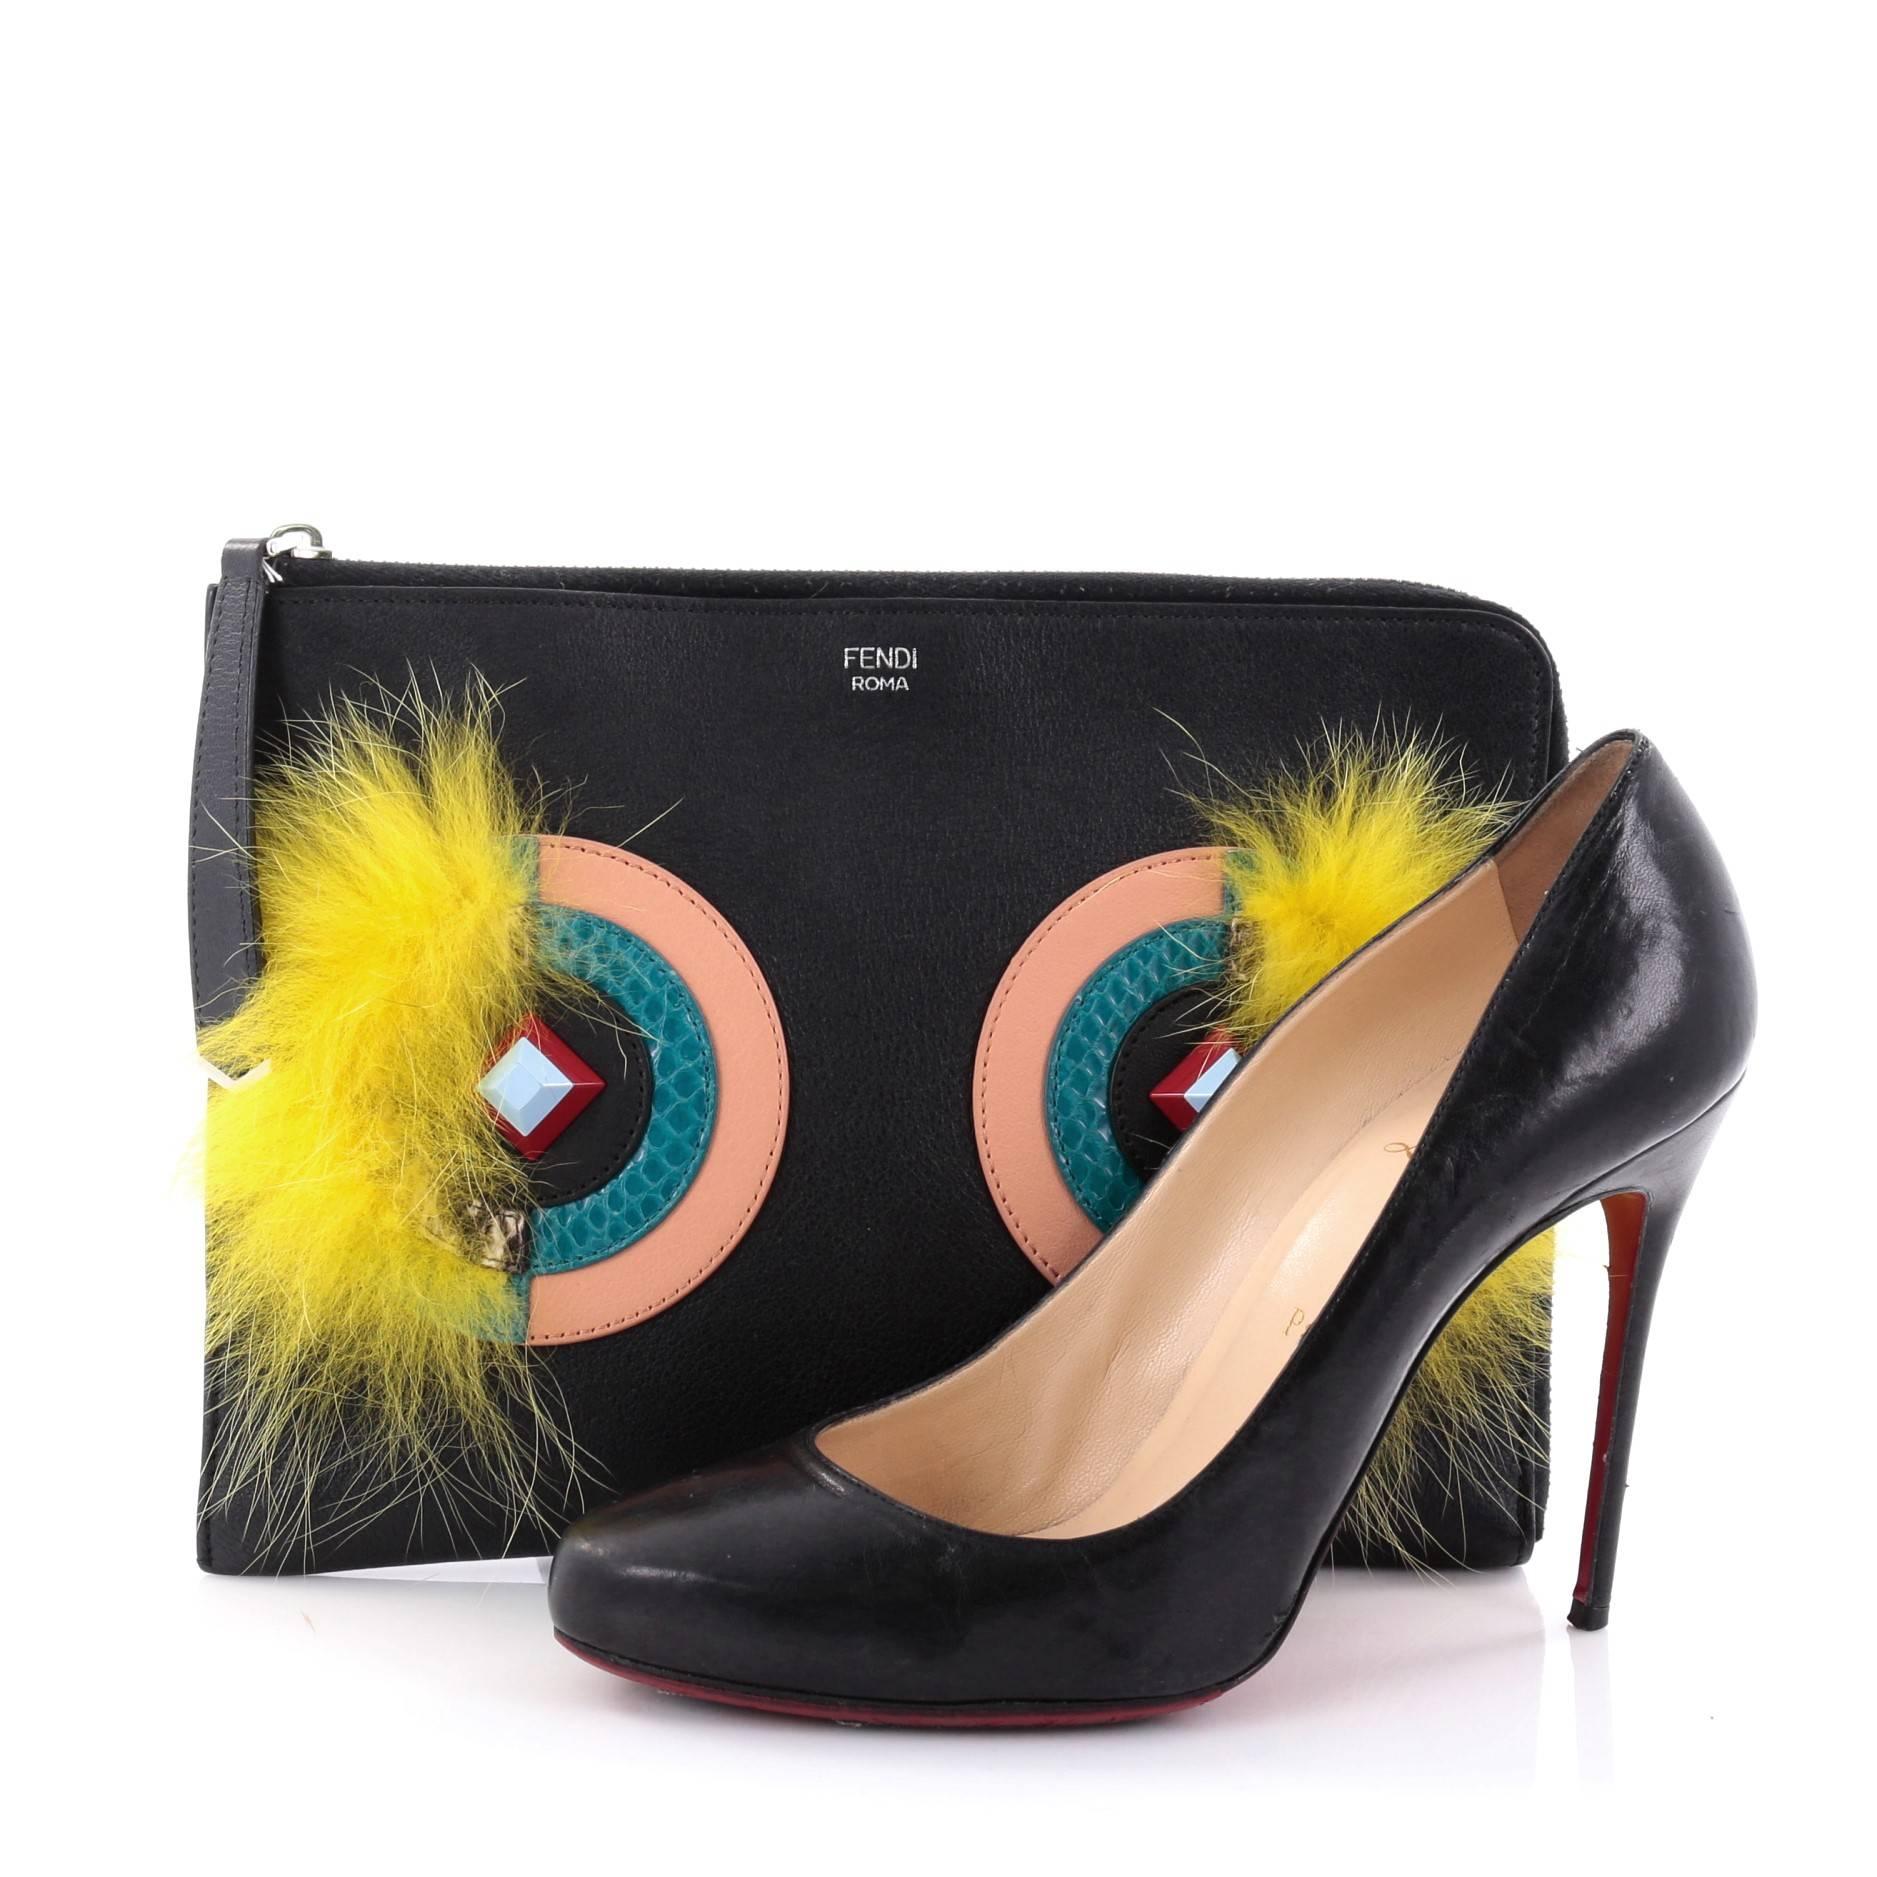 This authentic Fendi Monster Pouch Leather with Fur Small mixes bold and chic style perfect for daily use. Crafted from black leather, this pouch features eye-catching white 